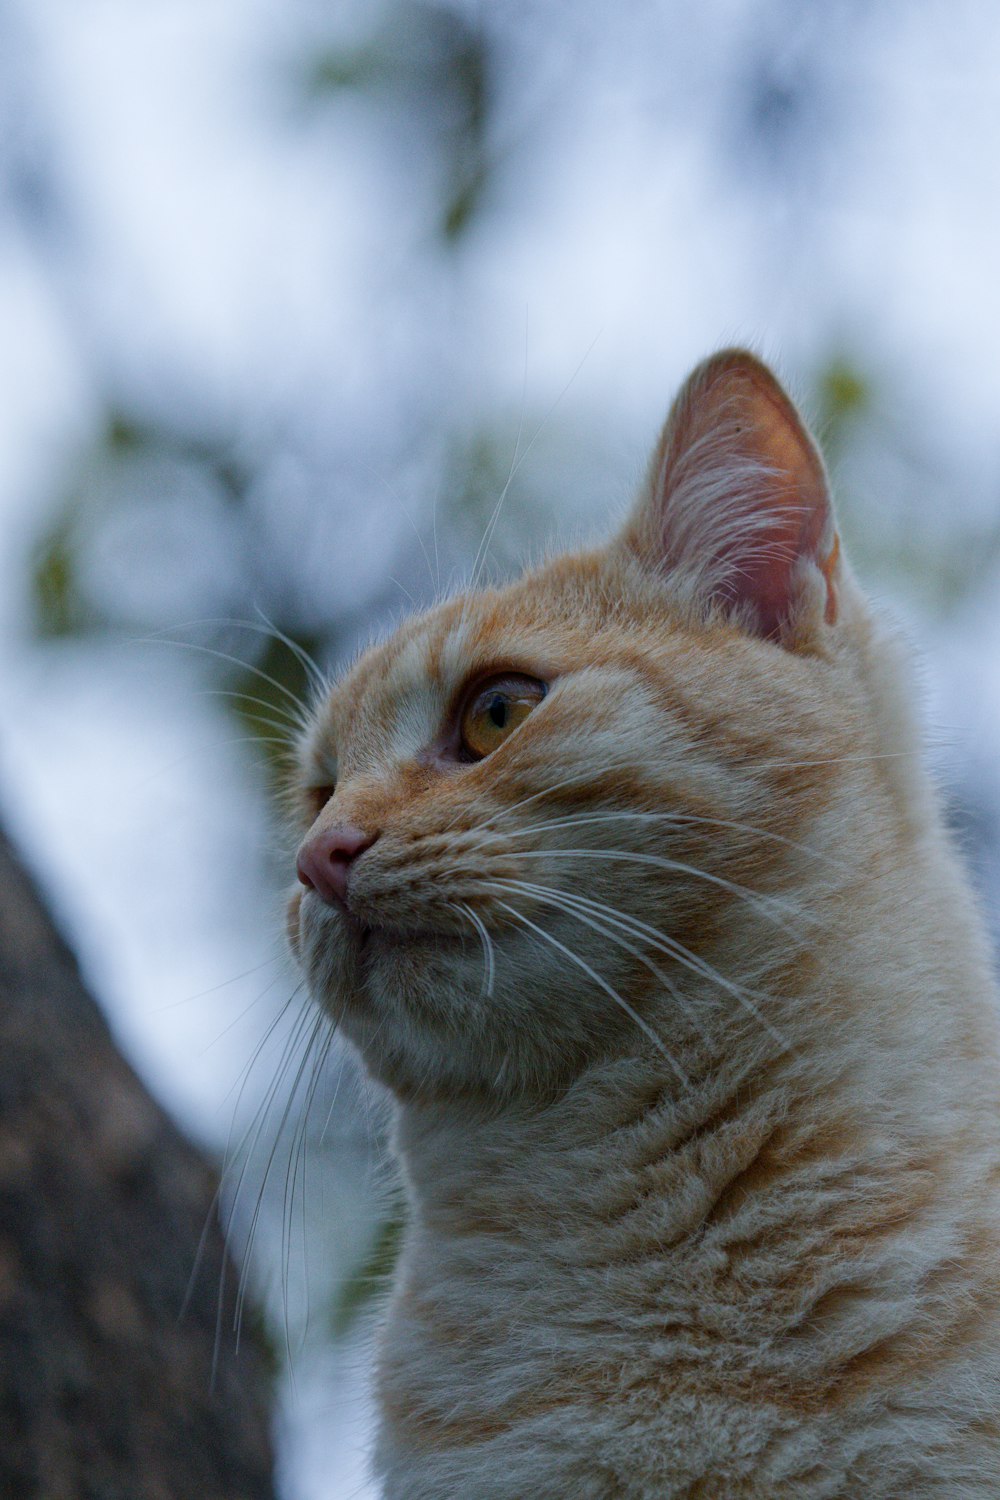 a close up of a cat on a tree branch